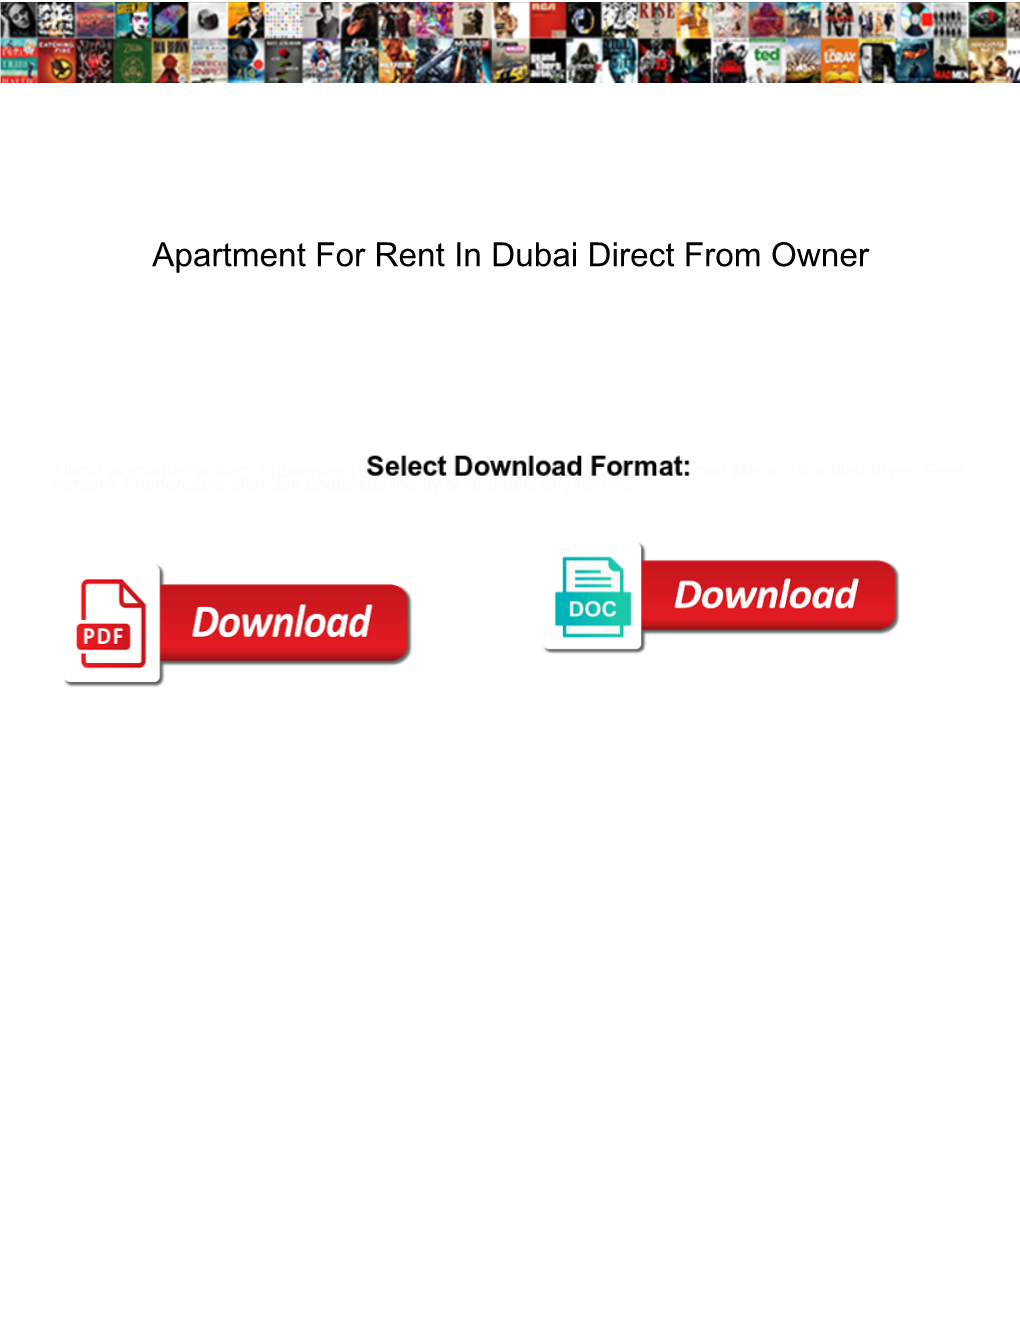 Apartment for Rent in Dubai Direct from Owner